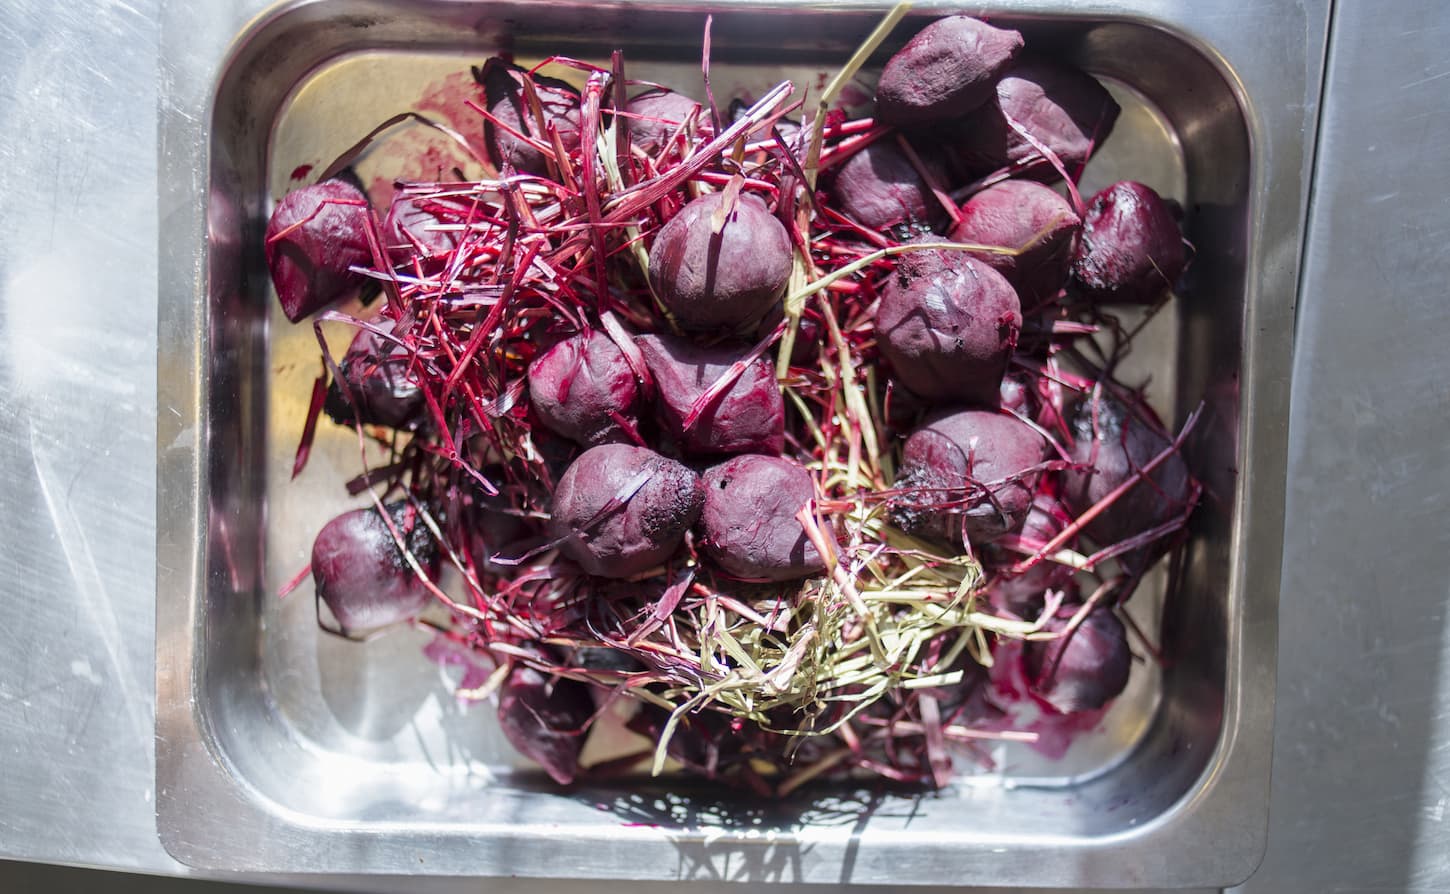 An image of beet in the tray on the kitchen counter.